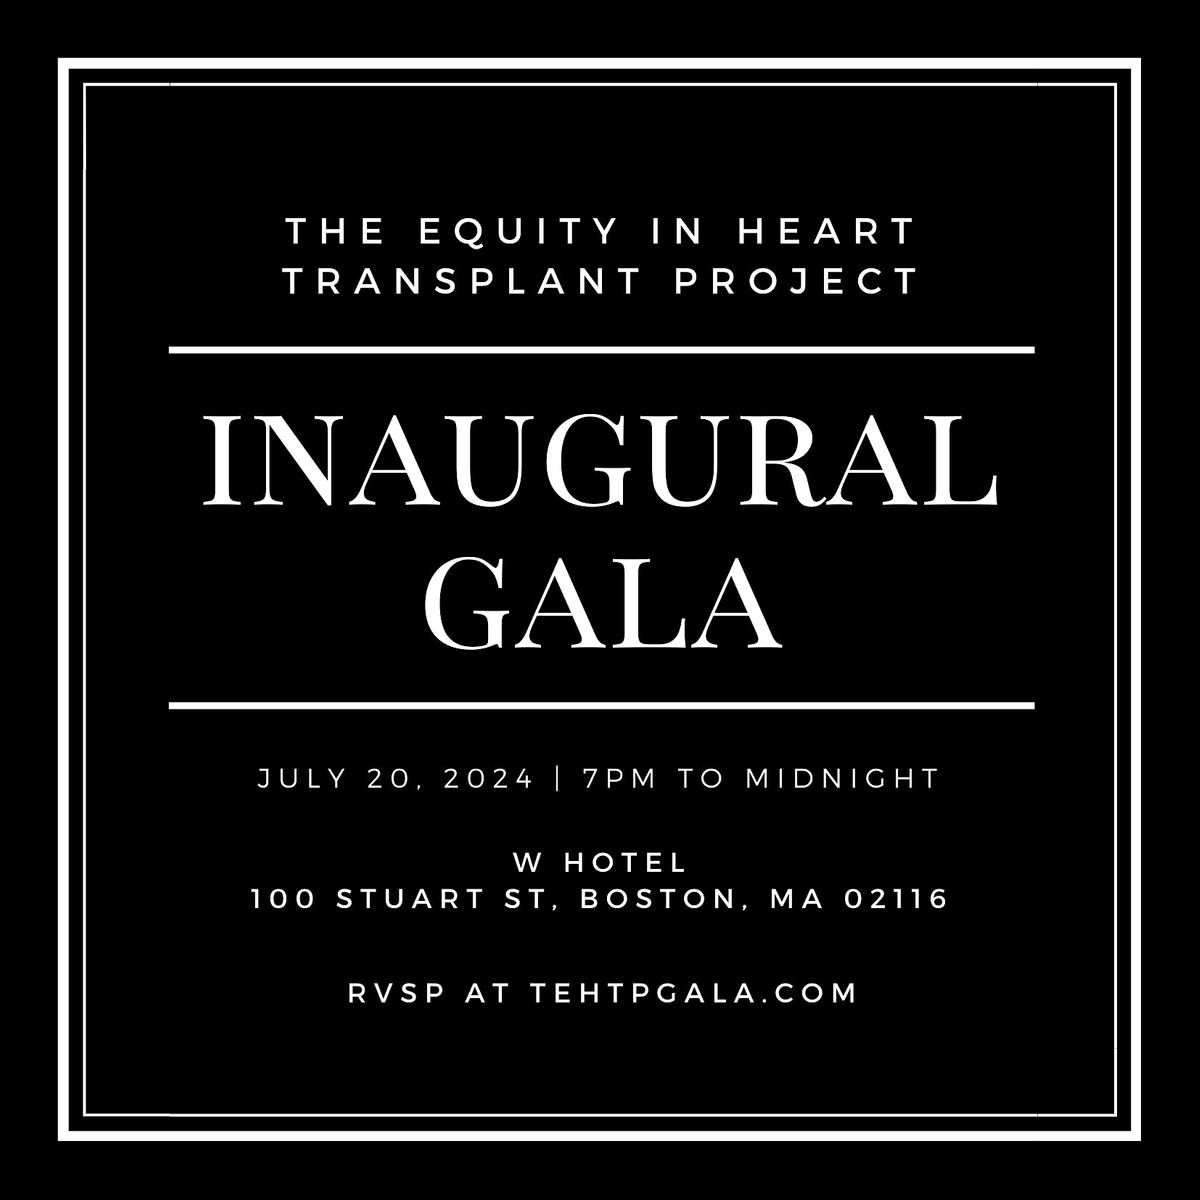 The Equity in Heart Transplant Project's Inaugural Gala